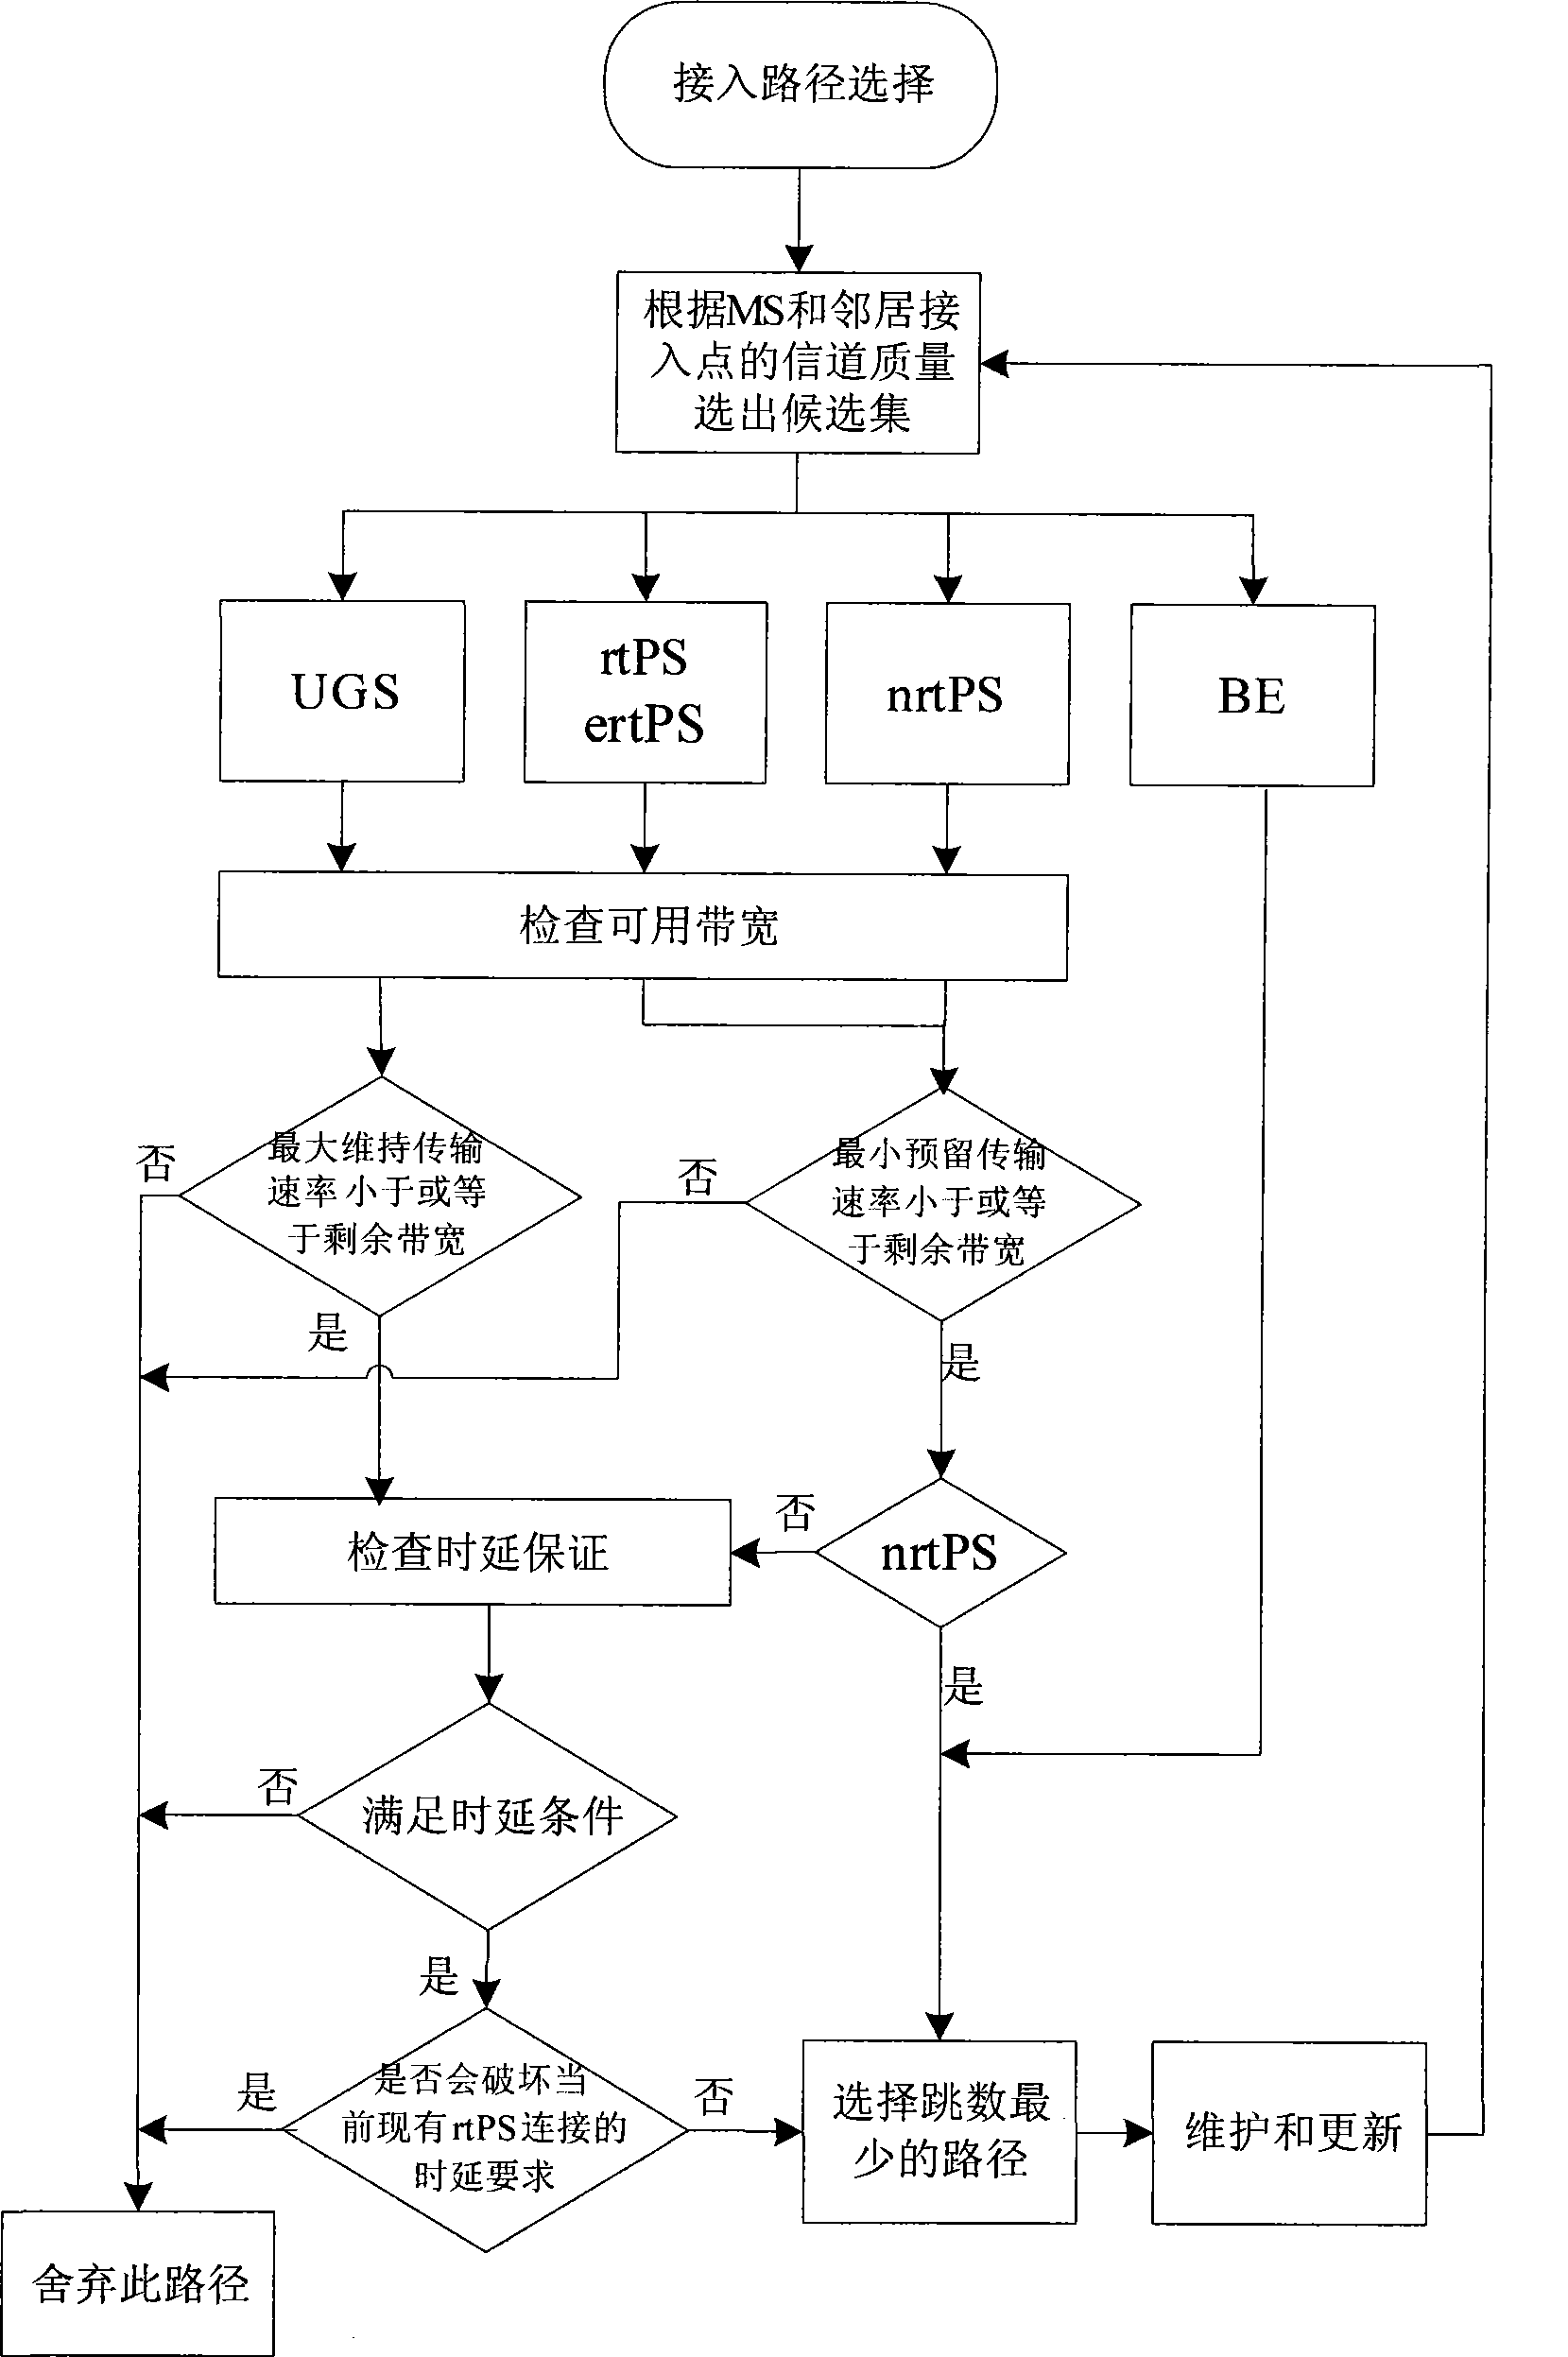 Fast access point switching method based on dynamic access path selection mechanism